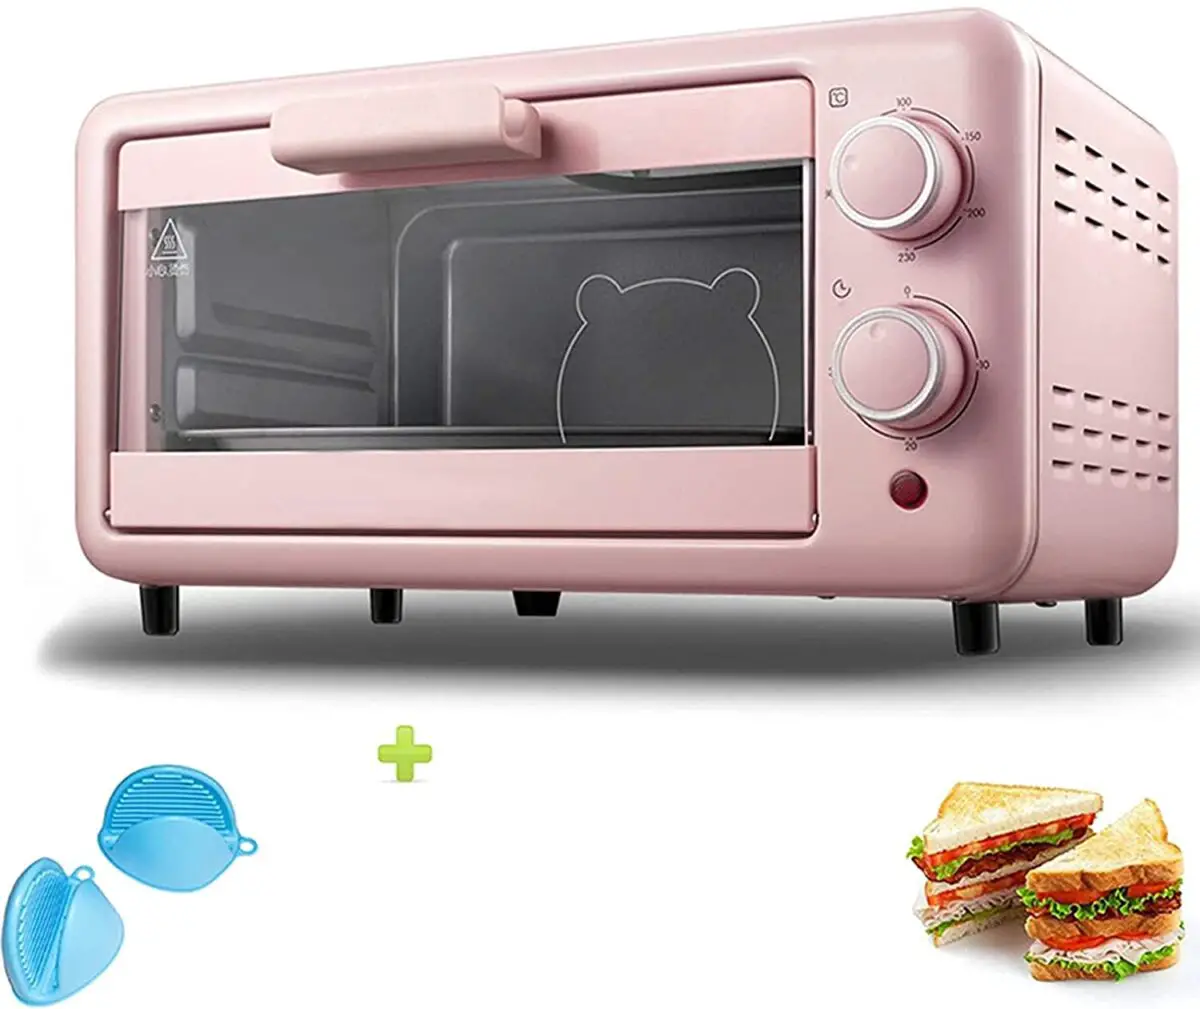 Tellgoy Electric Toaster Oven.